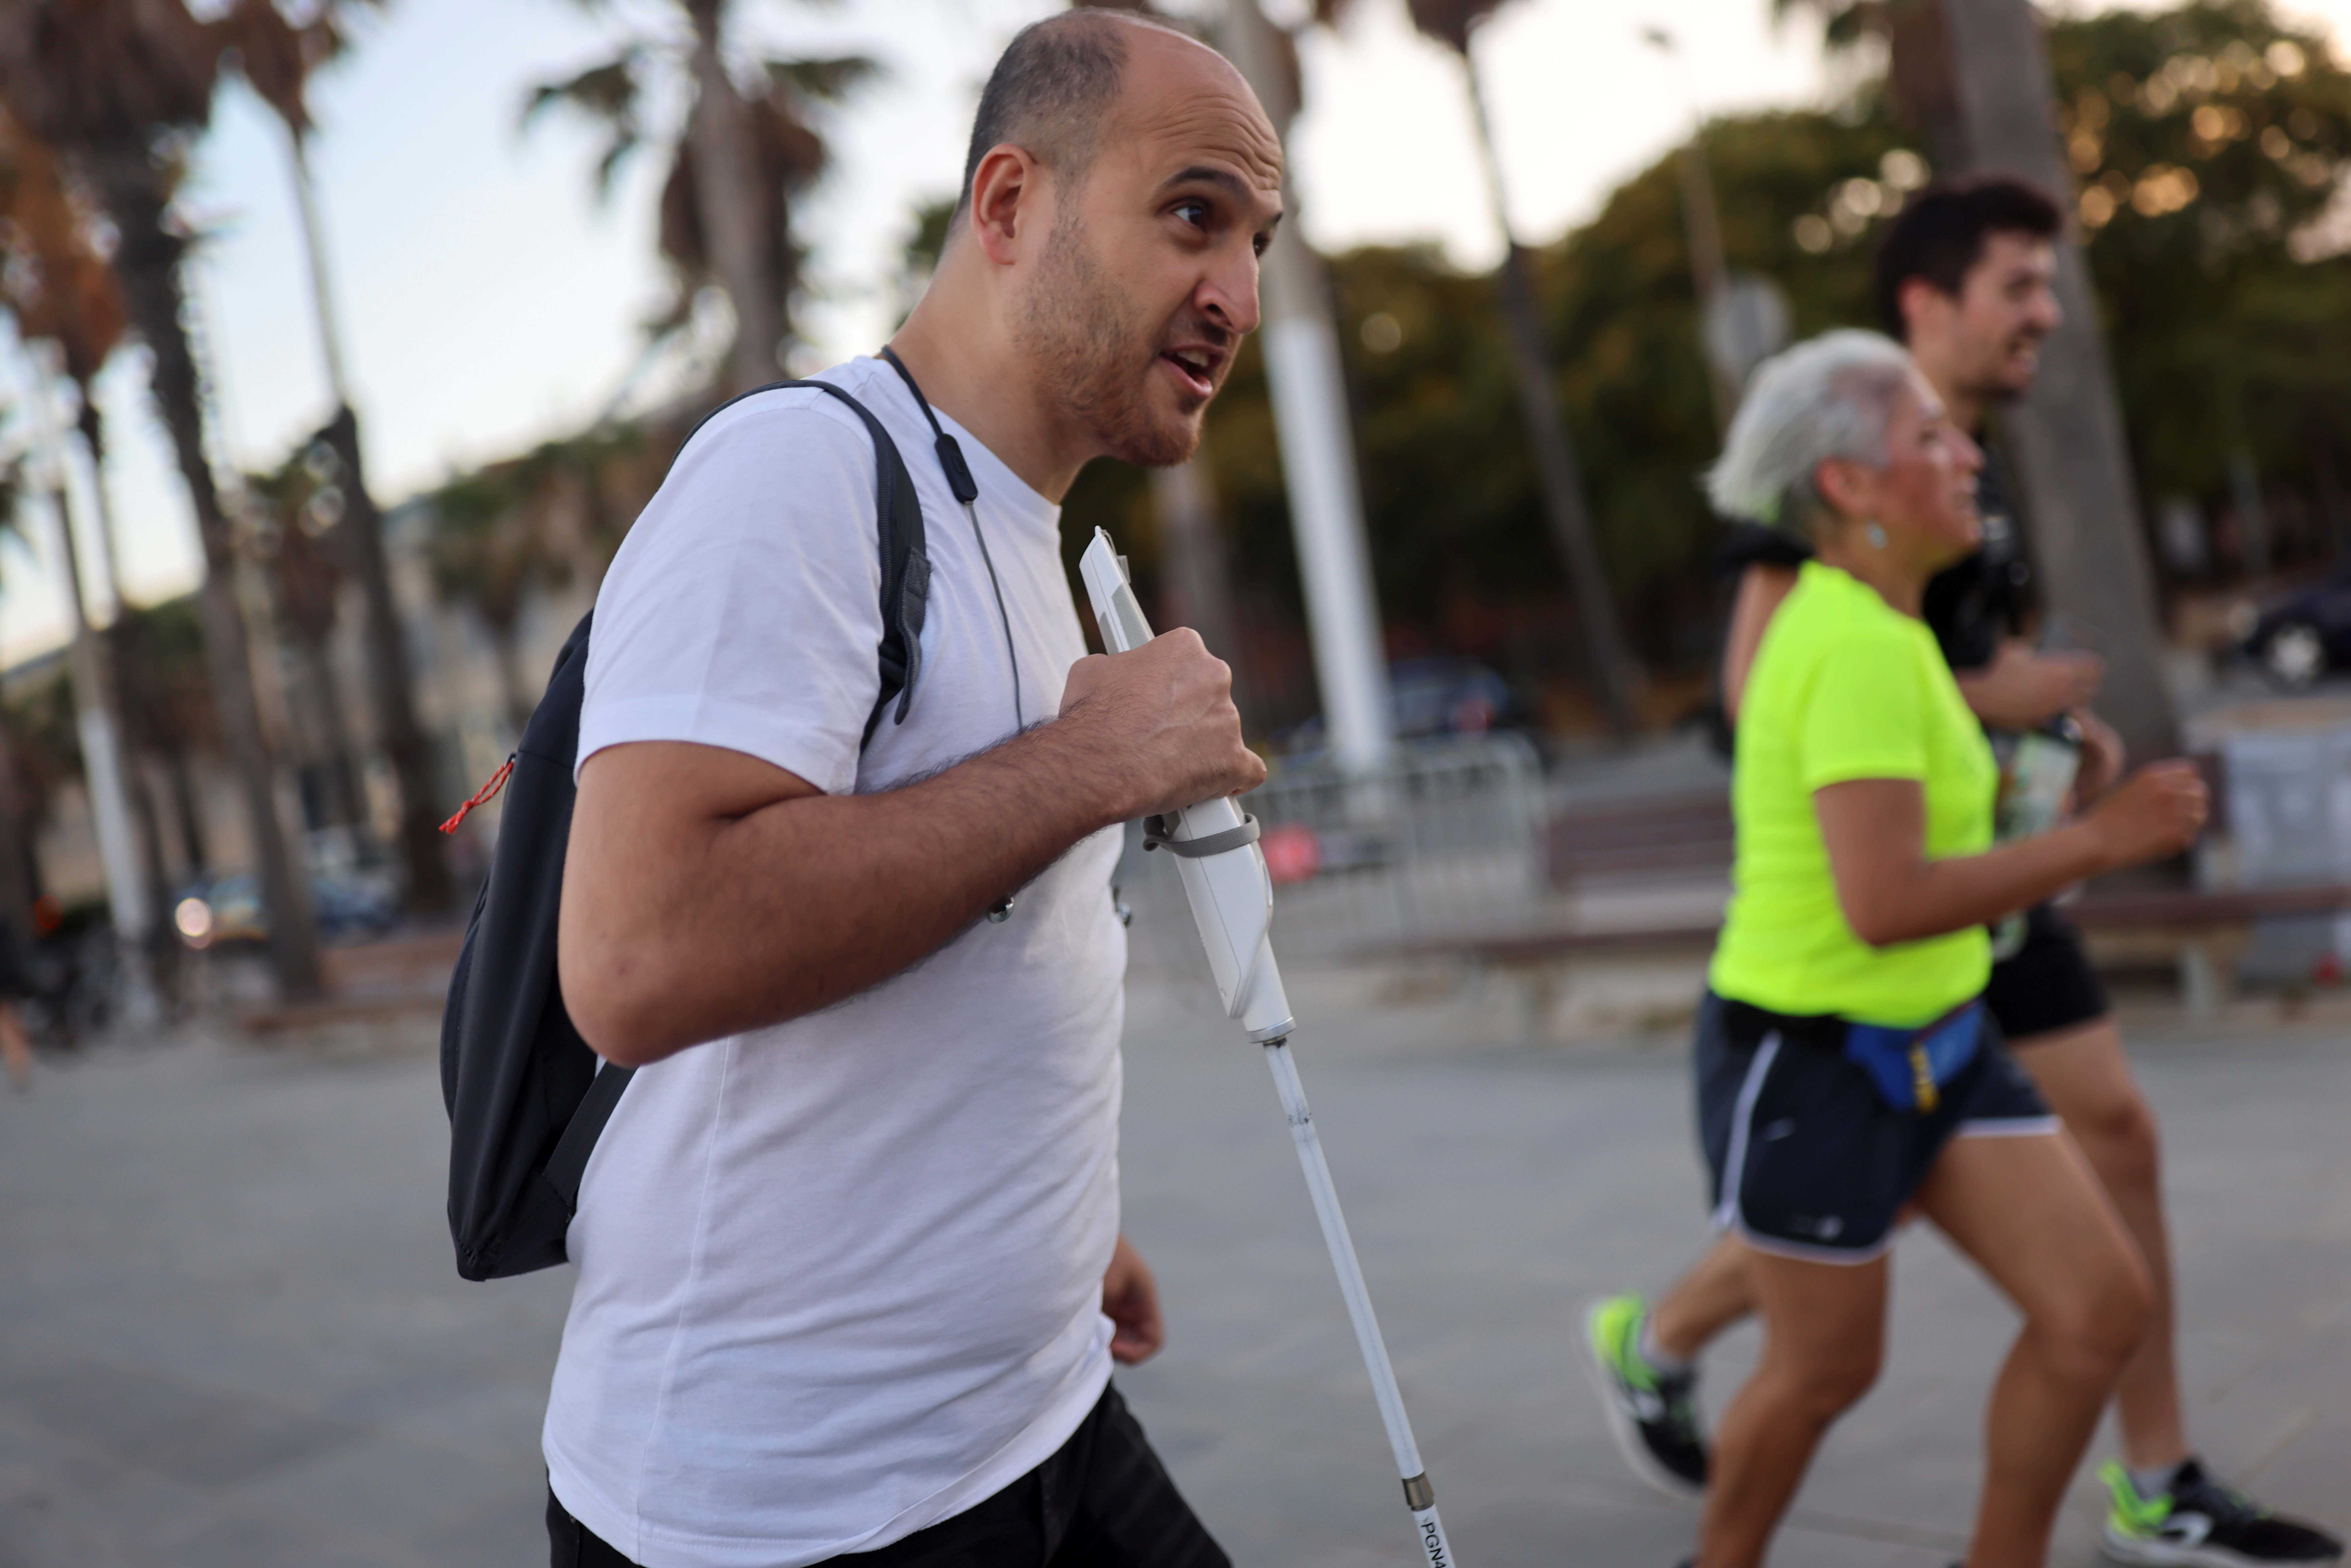 Blind Ceylan, inventor of the WeWalk smart cane, finds his way through a street using  his creation in Barcelona